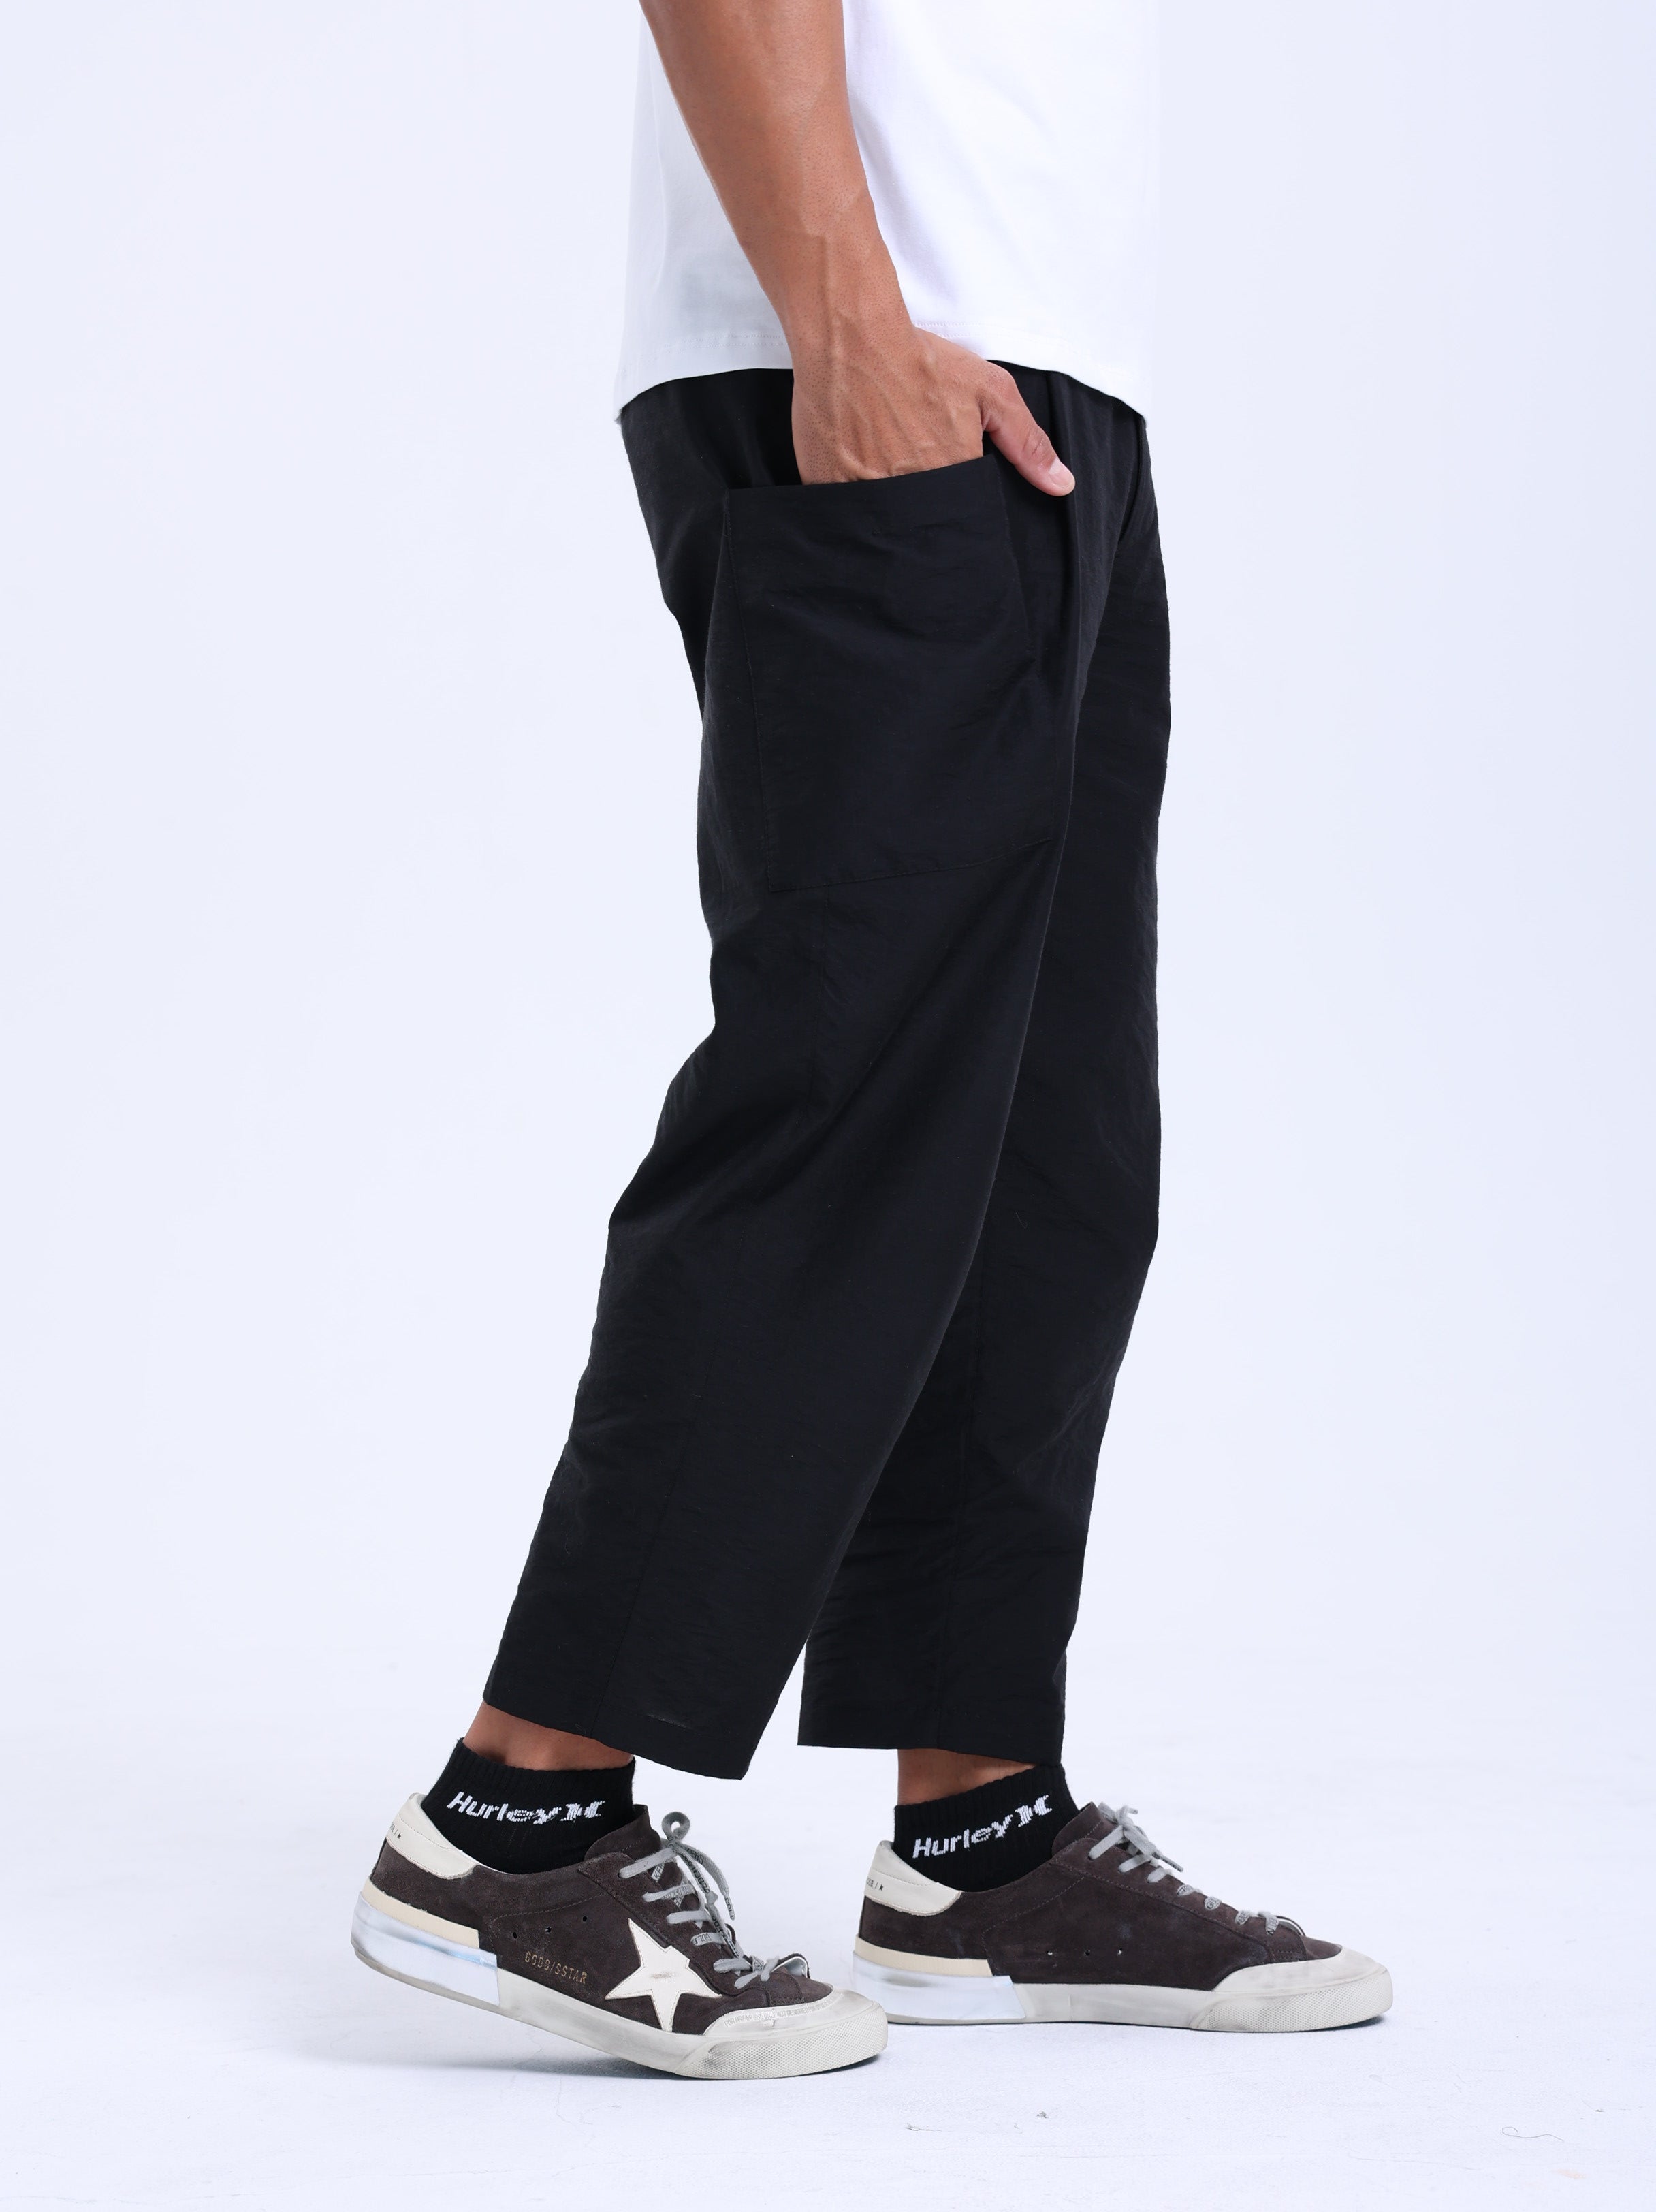 Loose Fit Trousers With Side Pockets